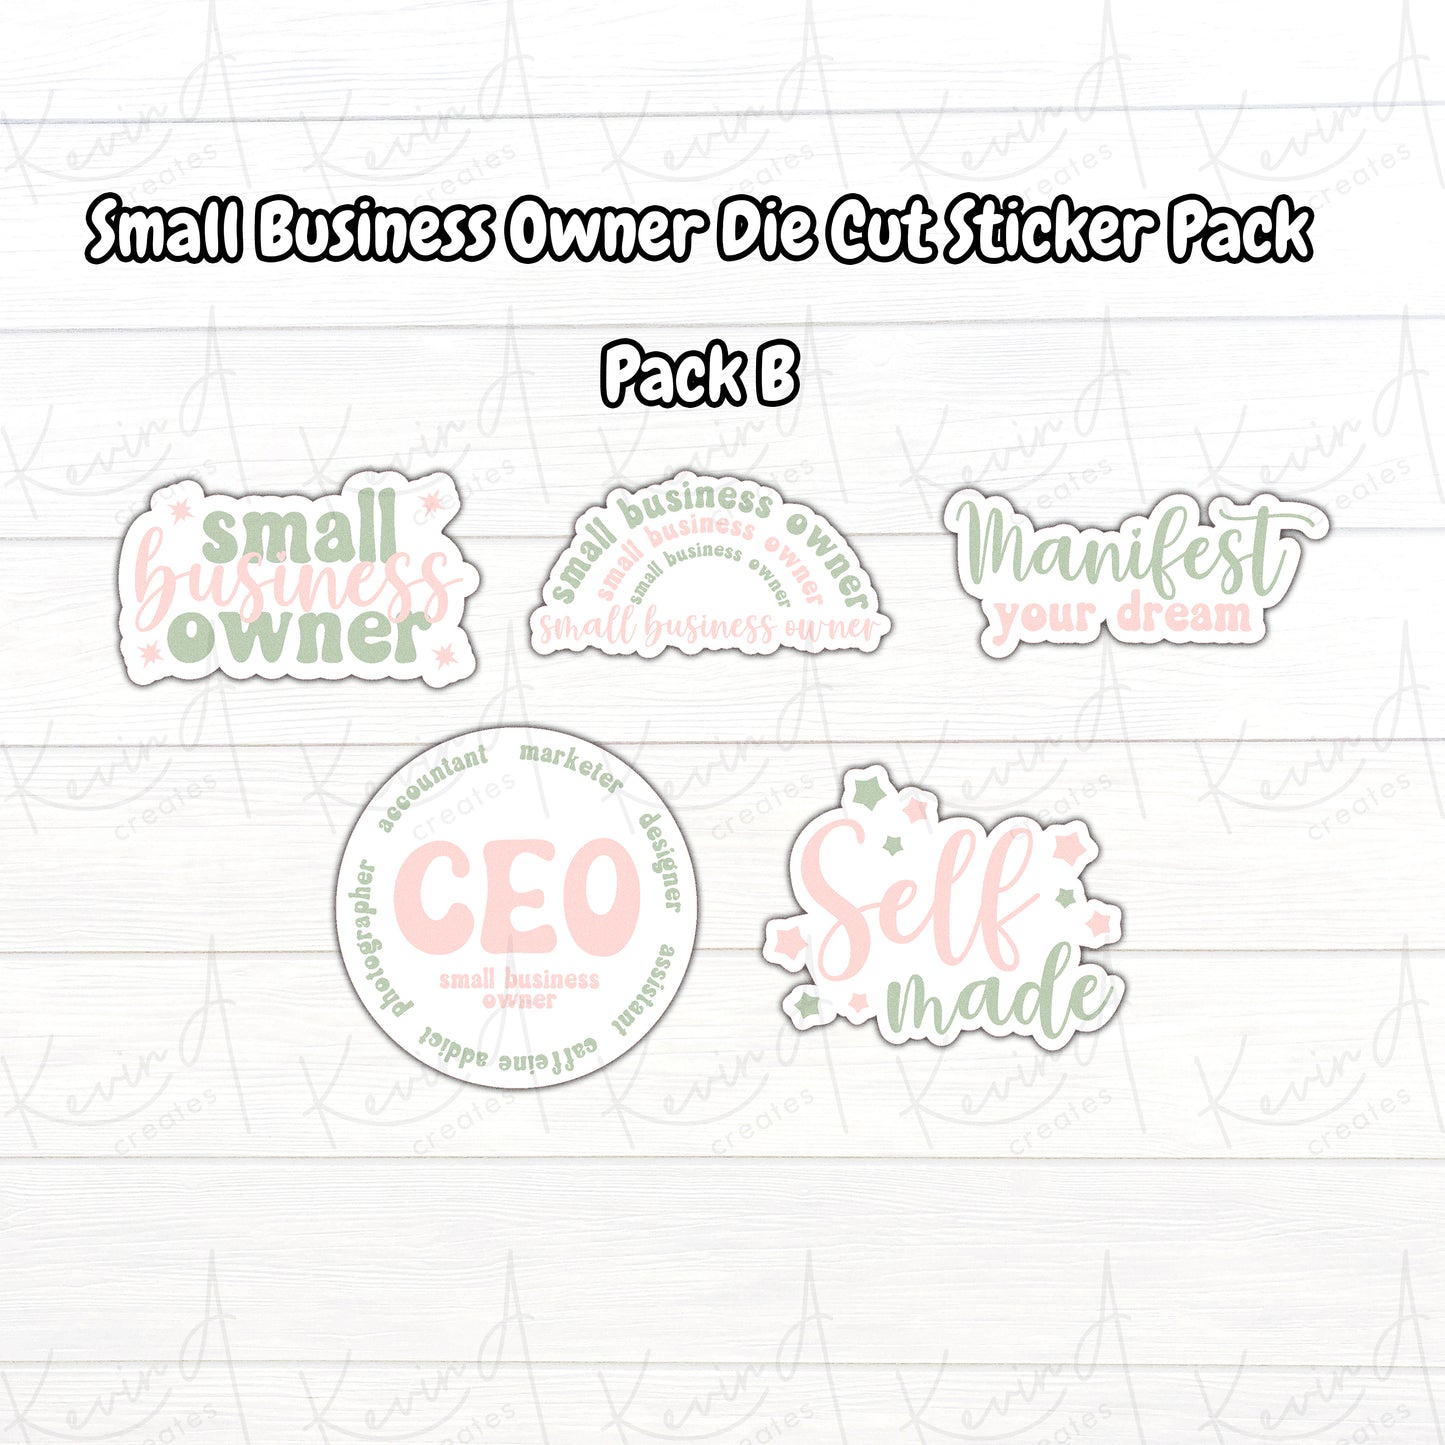 DC-065, "Small Business Owner" Die Cut Sticker Pack